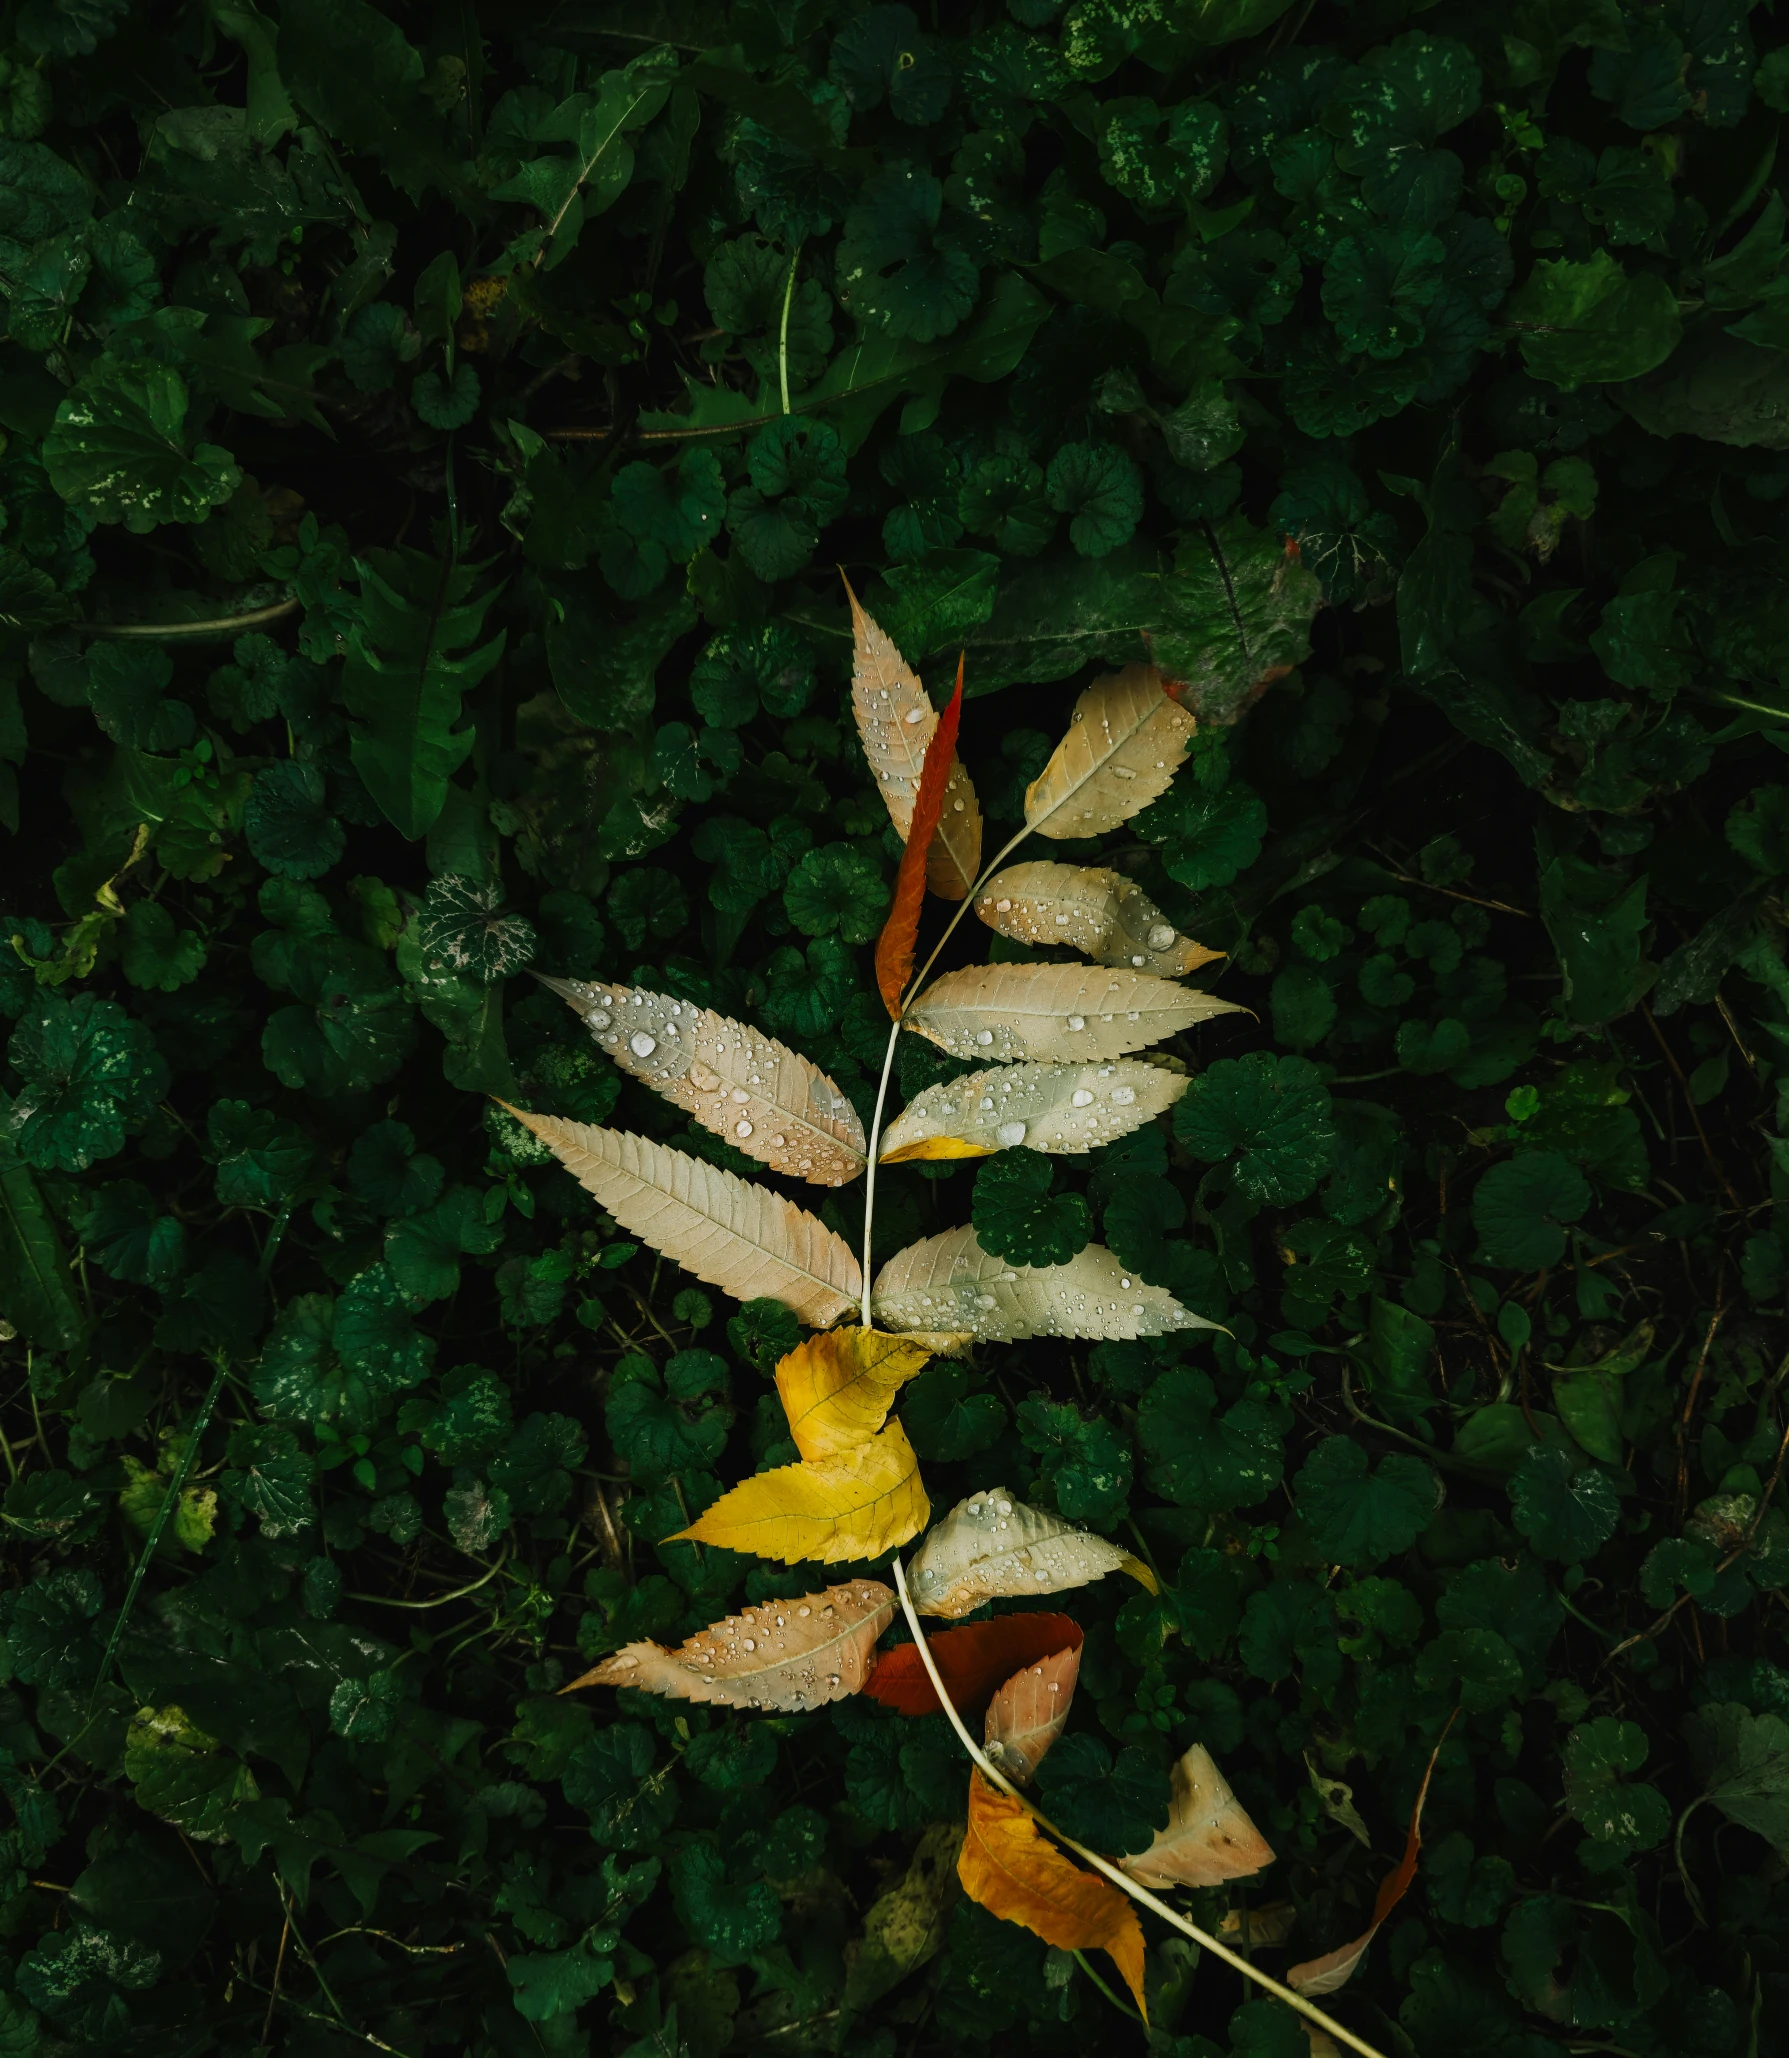 a fallen tree leaf in the middle of some grass